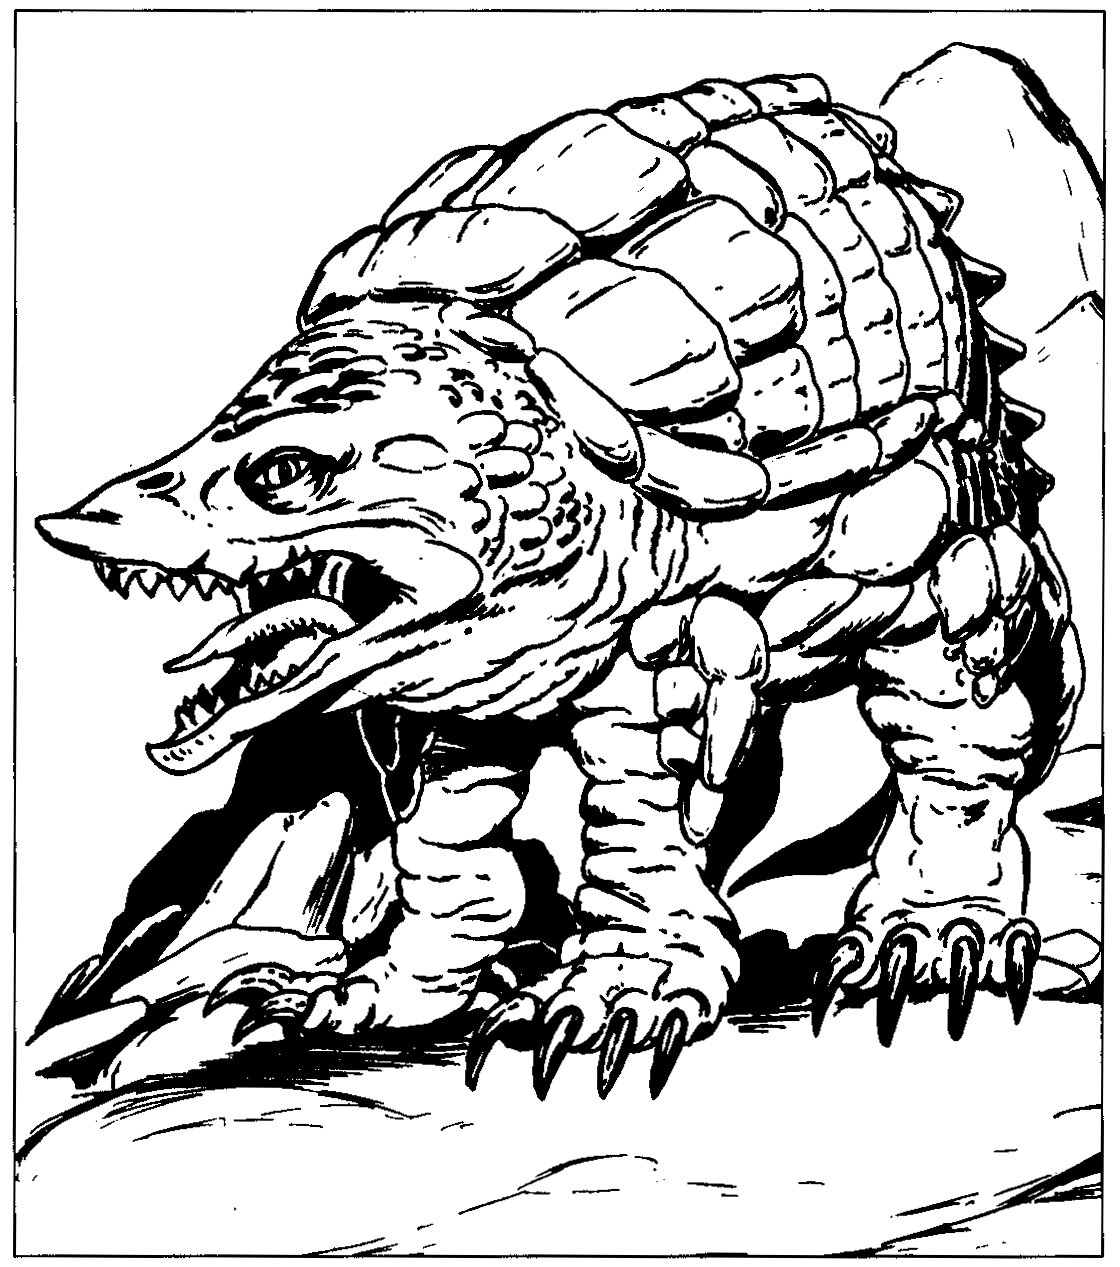 Number Lore free coloring pages - Busy Shark  Free coloring pages,  Coloring pages, Free coloring